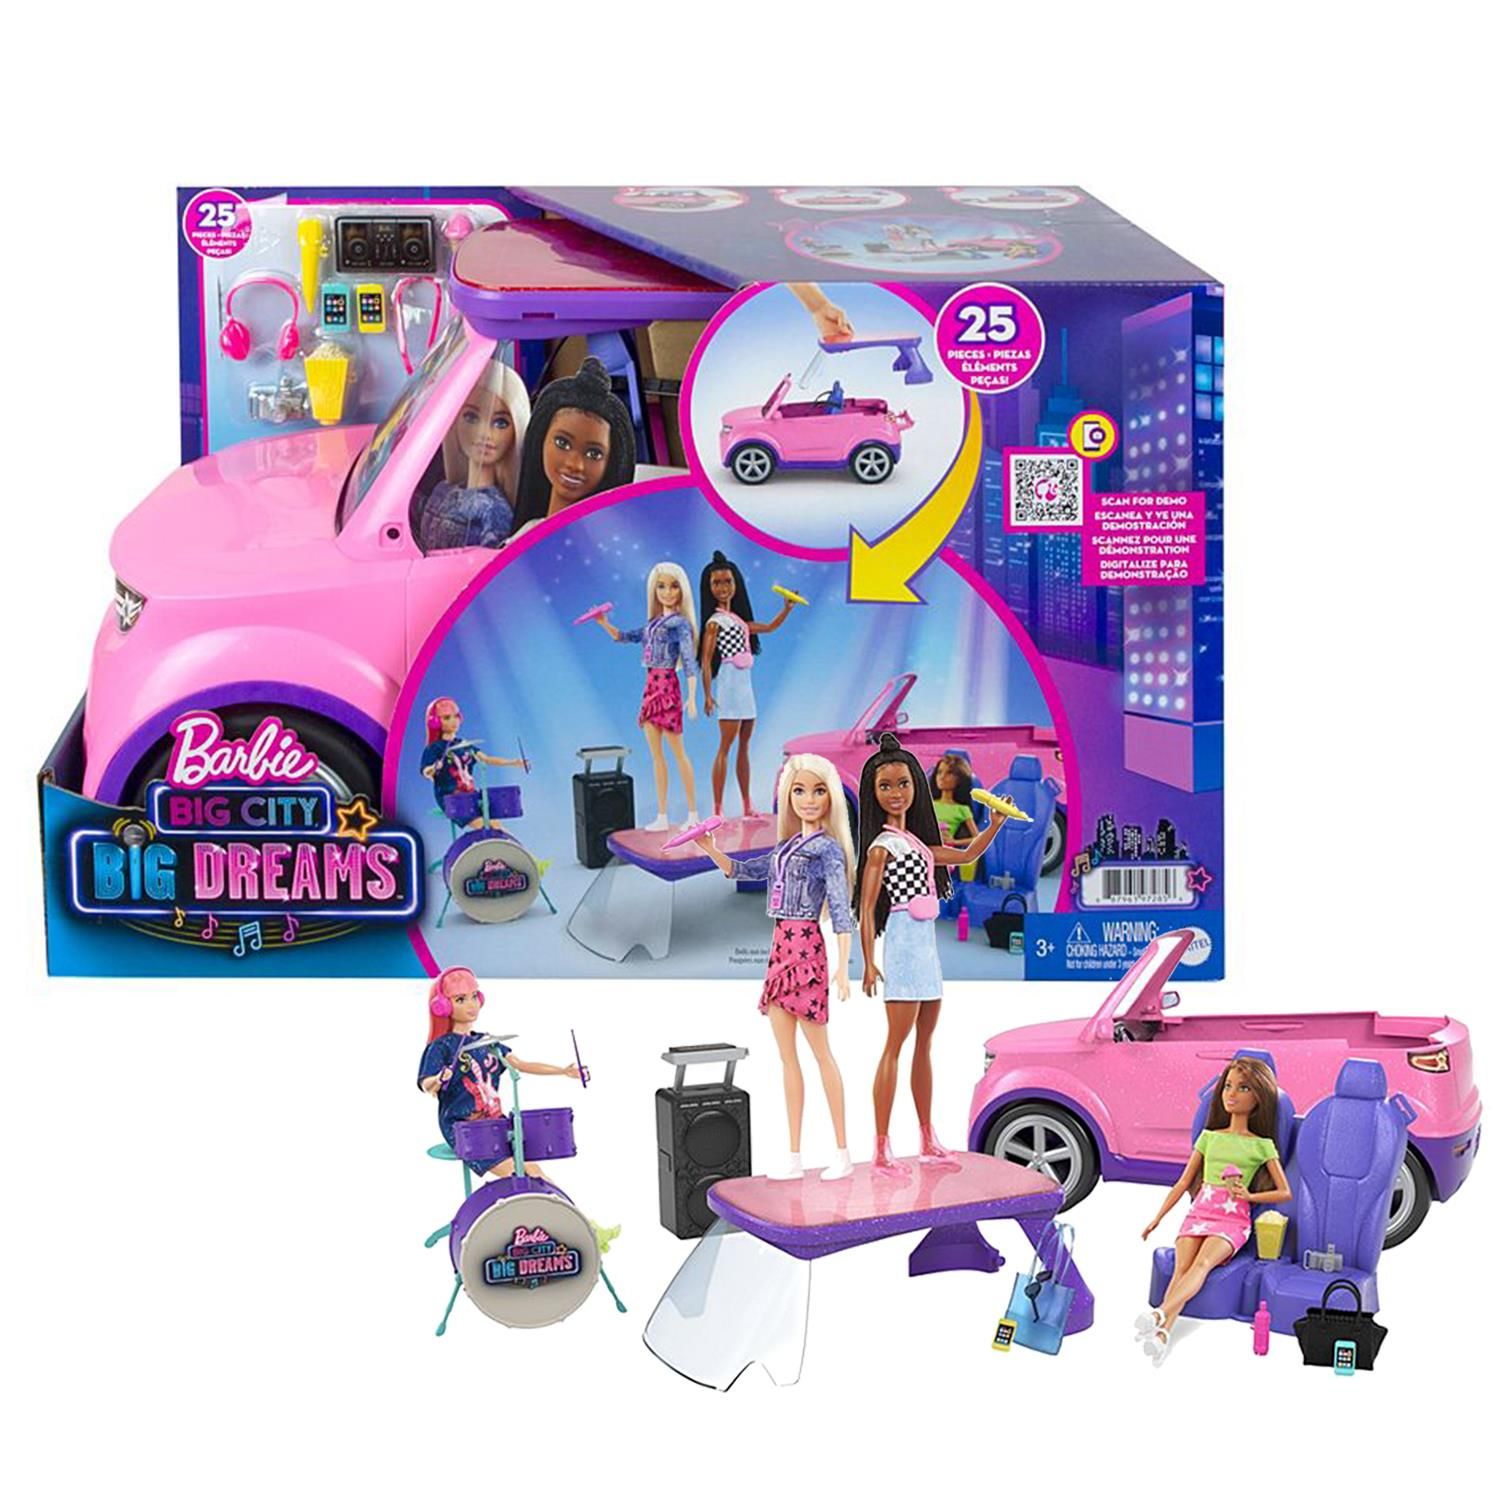 Imaginations can hit the road and play out rockin’ adventures with this transforming Barbie® vehicle playset inspired by Barbie: Big City, Big Dreams™ ! Ready to take the show on the road? Buckle two Barbie® dolls in (dolls sold separately), then park and transform the vehicle to set the scene for a pop-up performance! The glittery pink SUV features a removeable roof that becomes a stage, removeable seats that become seating for an audience and over 20 storytelling accessories including a drum set and stool, speaker and turntable, microphones and more. Future stars ages 3 years old and up can dream up all kinds of big adventures with this transforming Barbie® vehicle! Dolls sold separately. Colors and decorations may vary.

Features:

This Barbie® vehicle playset inspired by Barbie: Big City, Big Dreams™ transforms to reveal a stage and seating for a pop-up performance!
Take the show on the road in a glittery pink and purple SUV with rolling wheels, realistic details and room for 2 Barbie® dolls (sold separately).
Remove the roof to set up a stage for Barbie® doll and remove the seats to create a place for the audience to cheer her on!
Over 20 storytelling pieces include a drum set, speaker and turntable, microphones, snacks, backstage passes, smart phone accessories and more!
Pack the pieces back inside the car for easy clean-up.
With so many storytelling opportunities, this Barbie: Big City, Big Dreams™ vehicle playset makes a great gift for 3 to 7 year olds, especially those that love the spotlight!

Box Contains: Barbie Big City and Big Dream Playset.

Playset Includes: Transforming SUV Car, Handbags, Microphones, Snacks, Backstage Passes, Smart phone accessories, Drum set, Speaker.